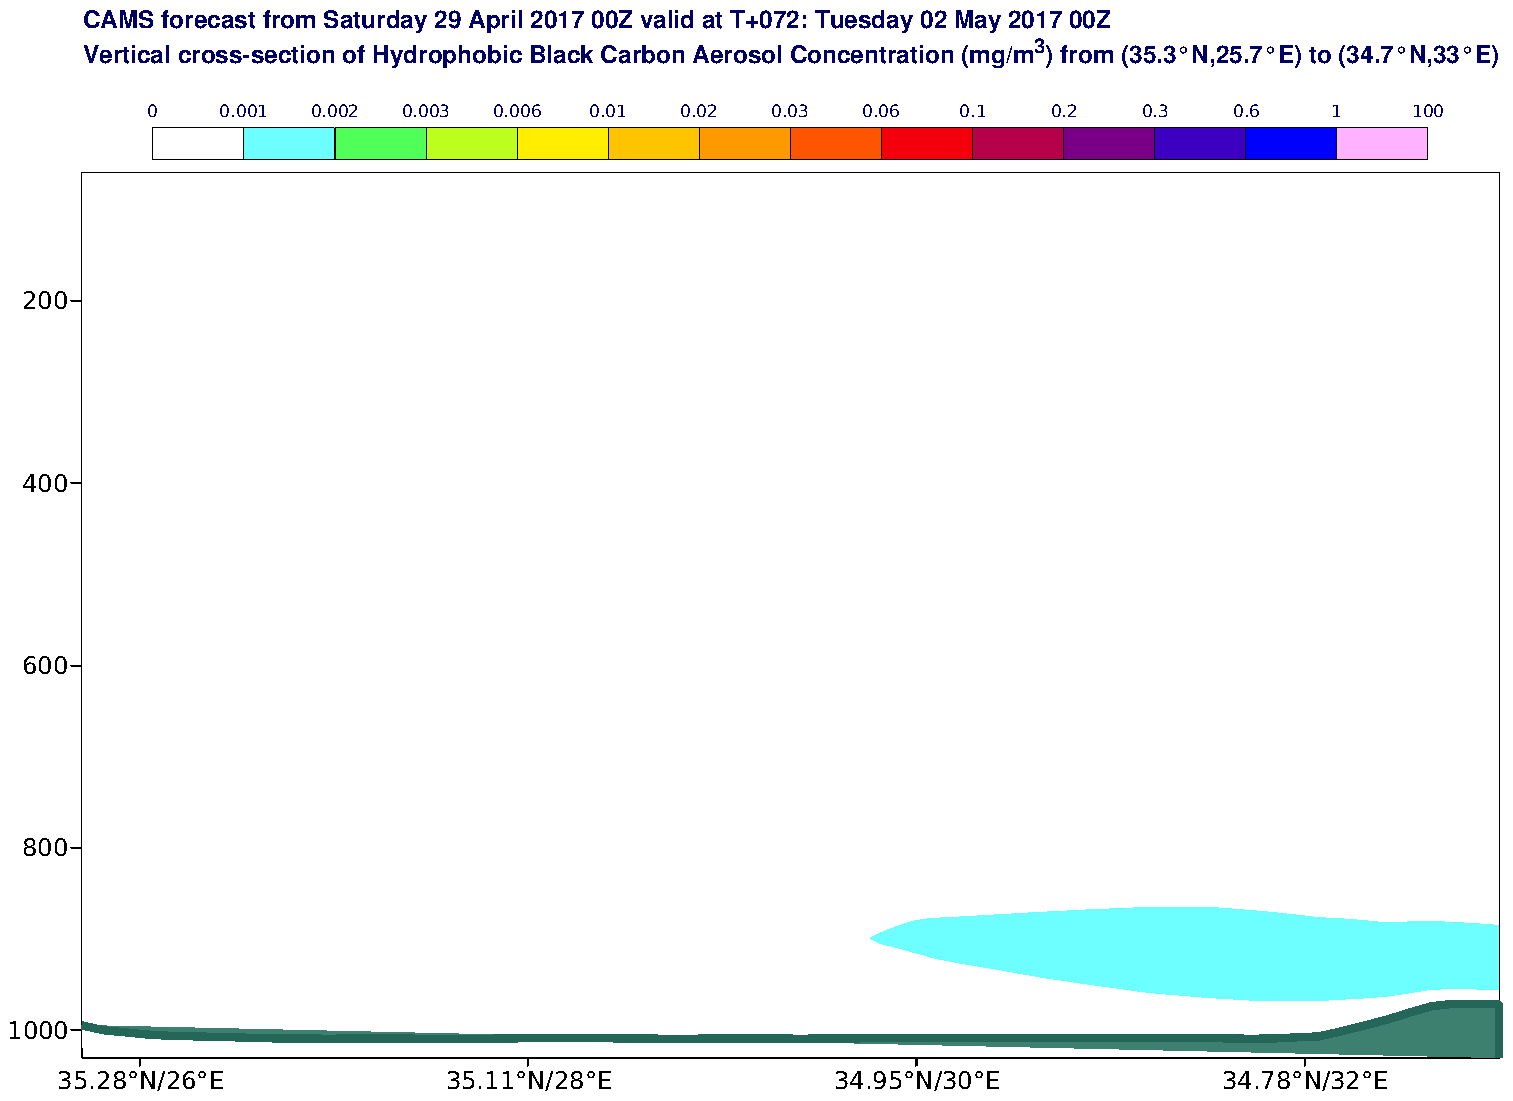 Vertical cross-section of Hydrophobic Black Carbon Aerosol Concentration (mg/m3) valid at T72 - 2017-05-02 00:00